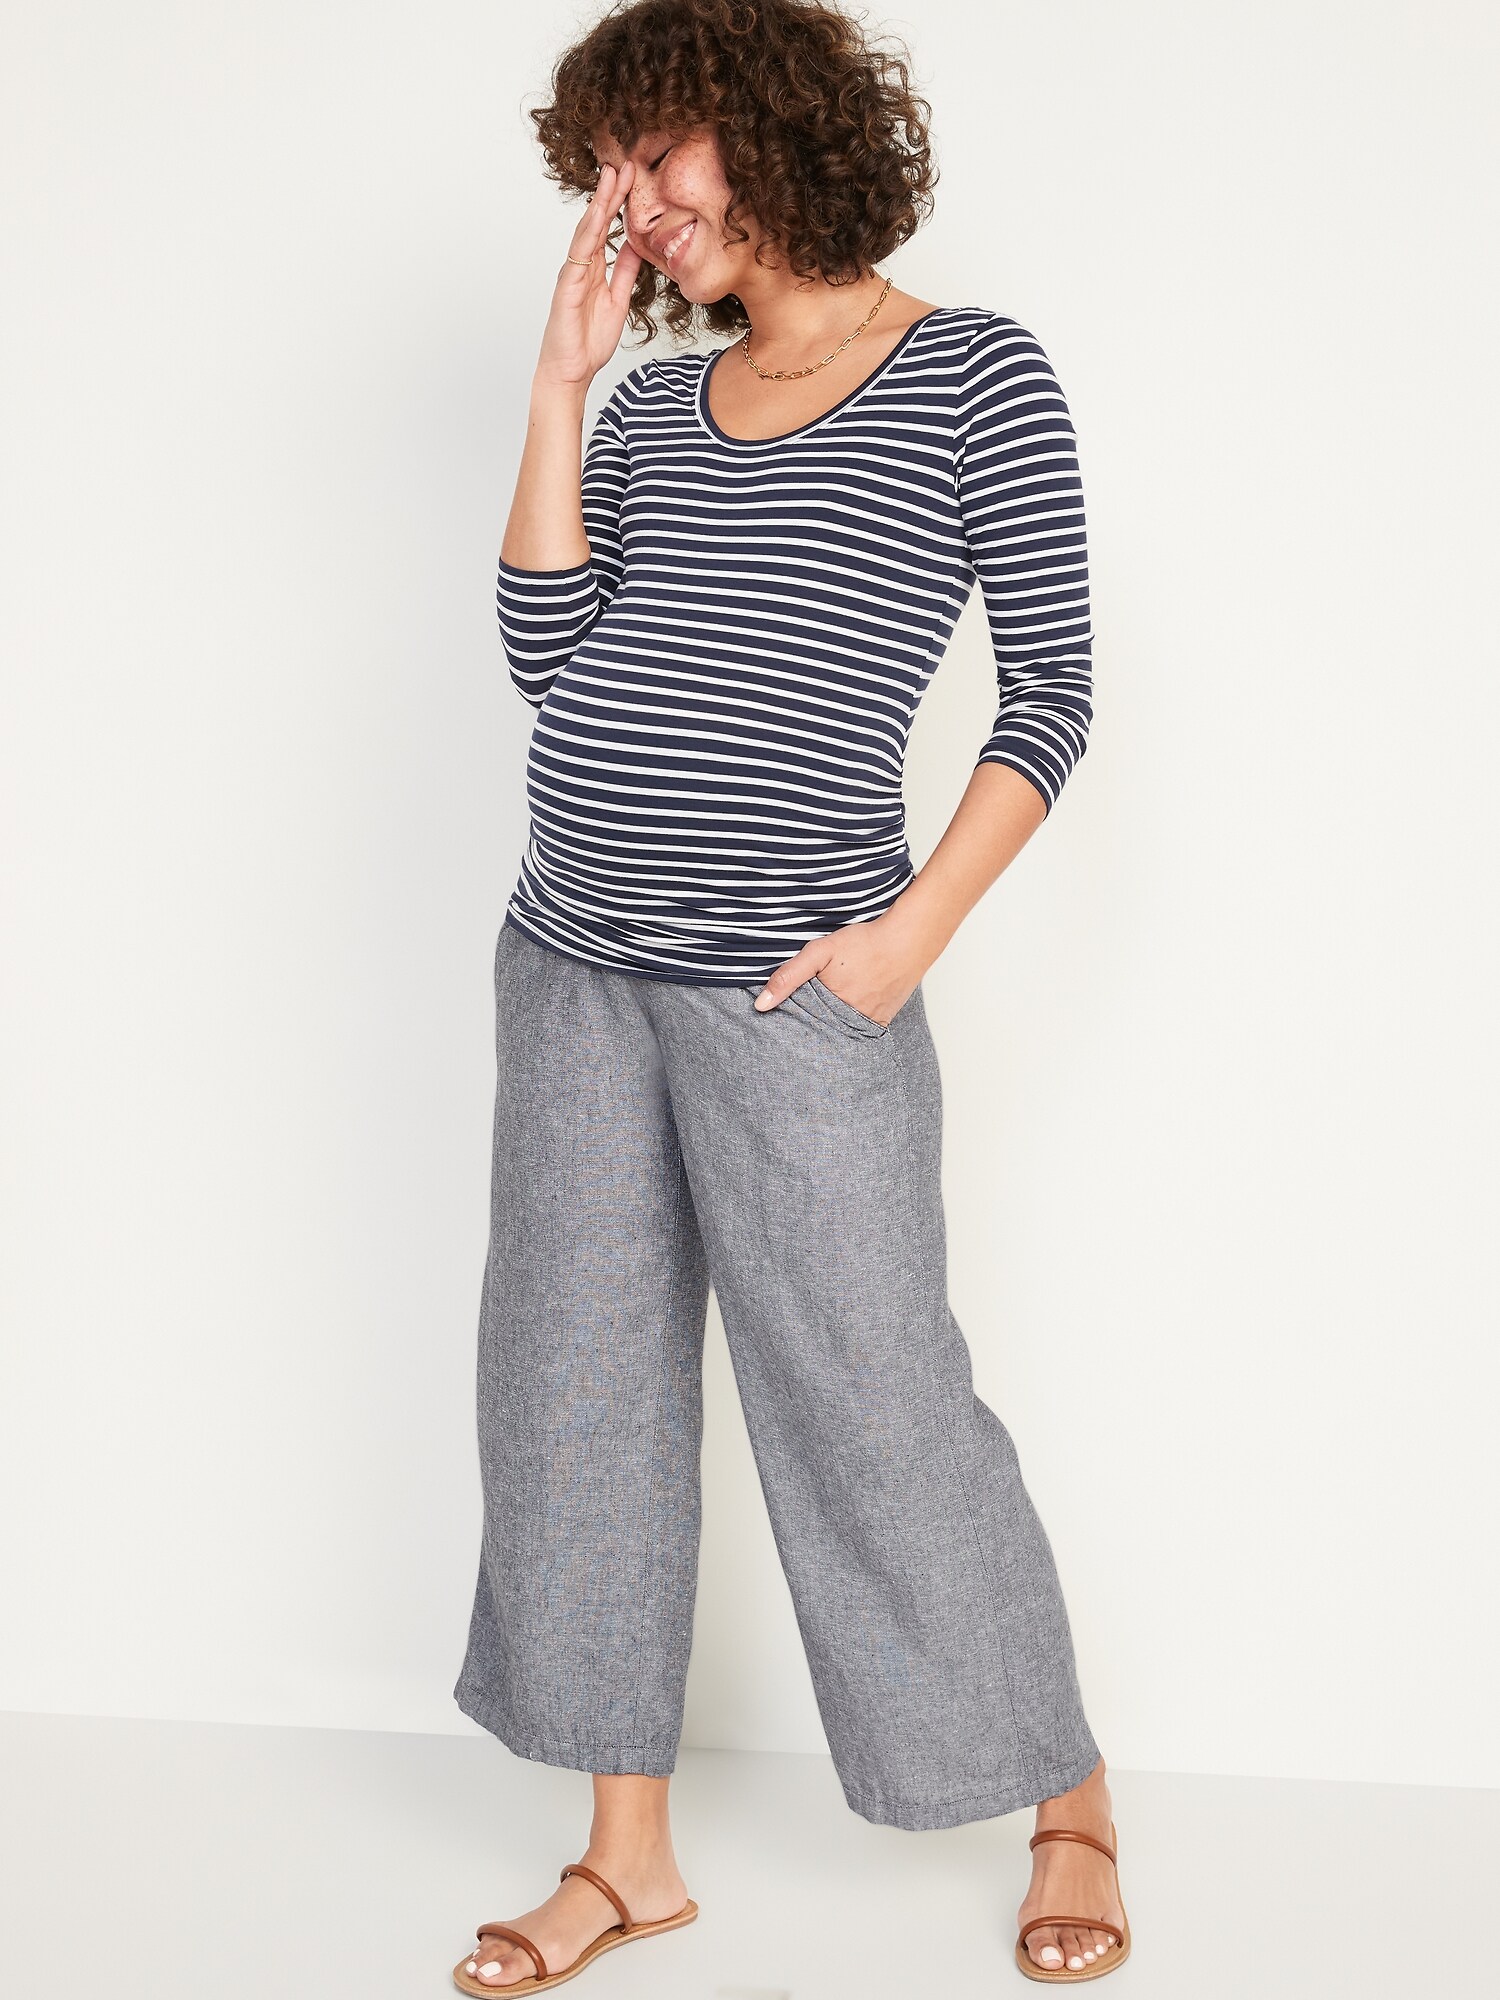 Old Navy Maternity Rollover-Waist Linen-Blend Wide-Leg Pants, 26 Chic Yet  Comfy Old Navy Maternity Pieces to Carry You Through Your Whole Pregnancy